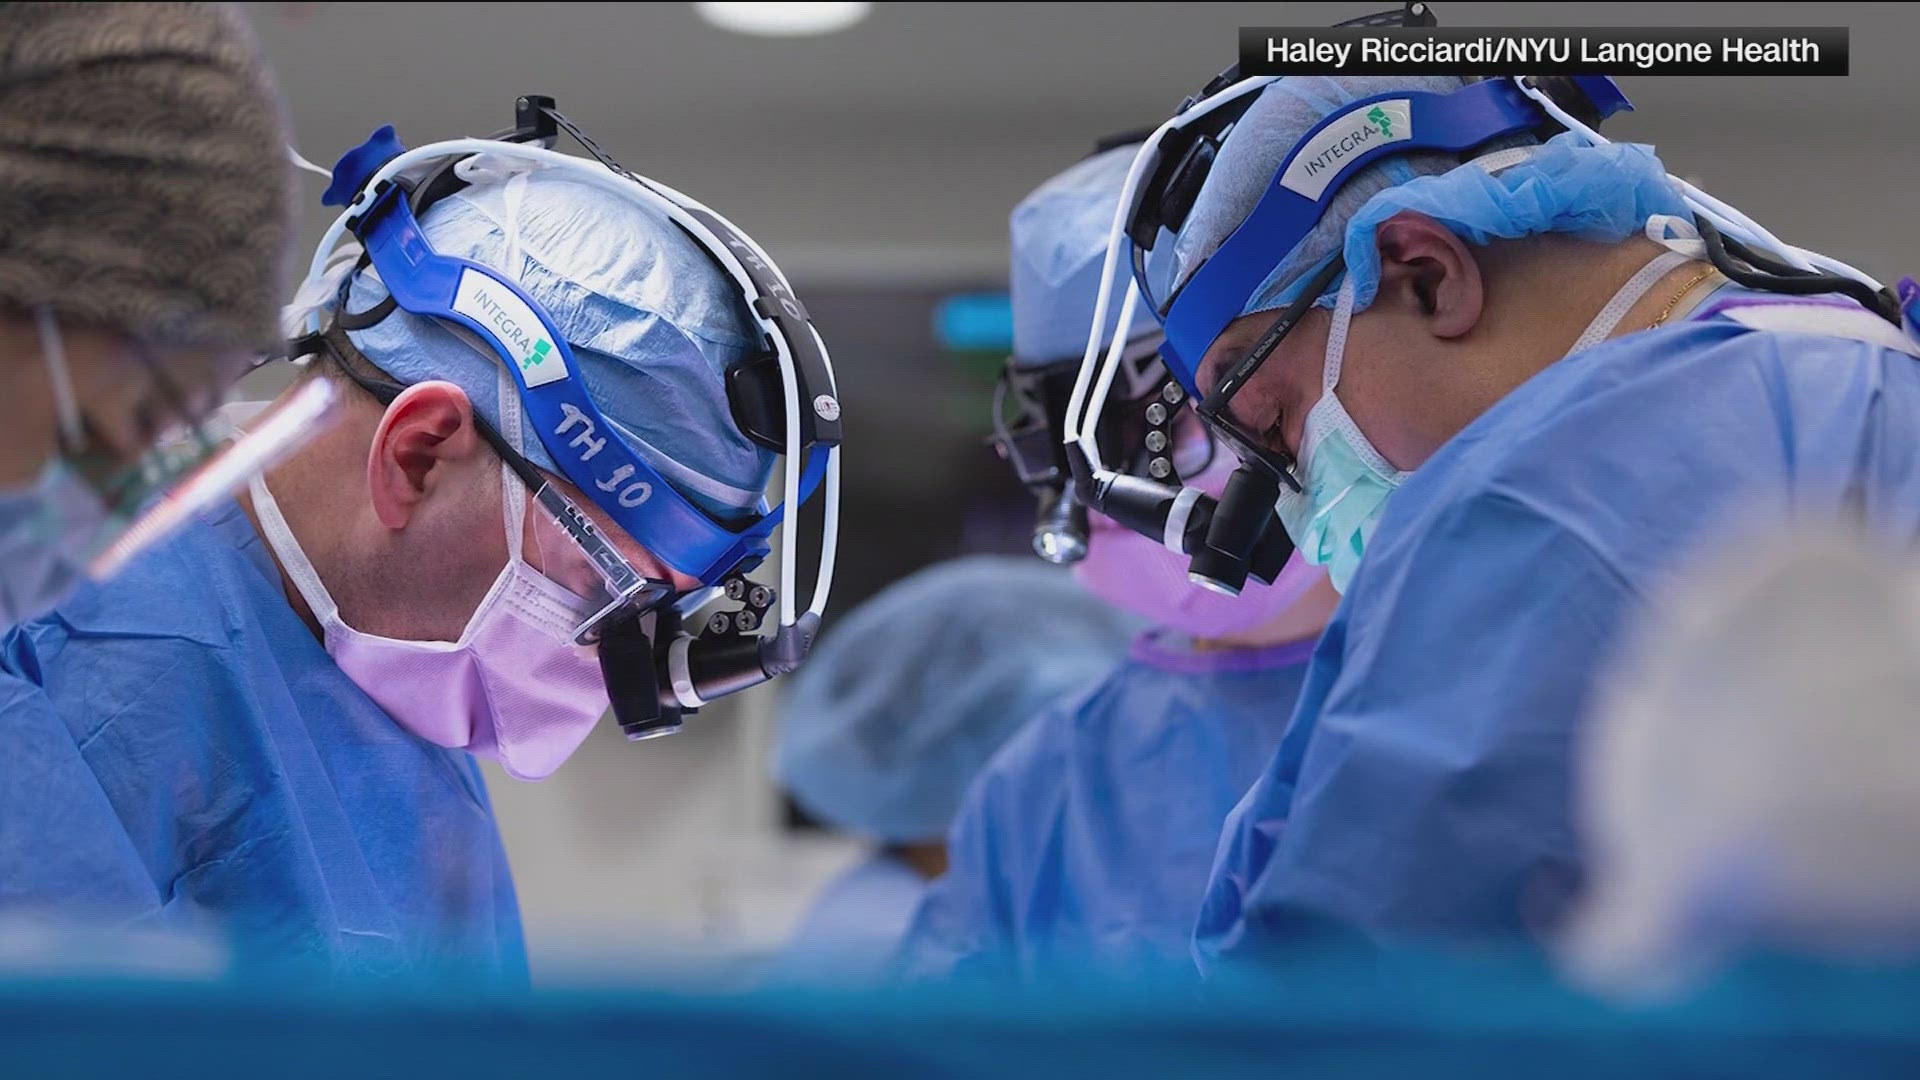 Health experts say it's an amazing accomplishment in the world of surgery.